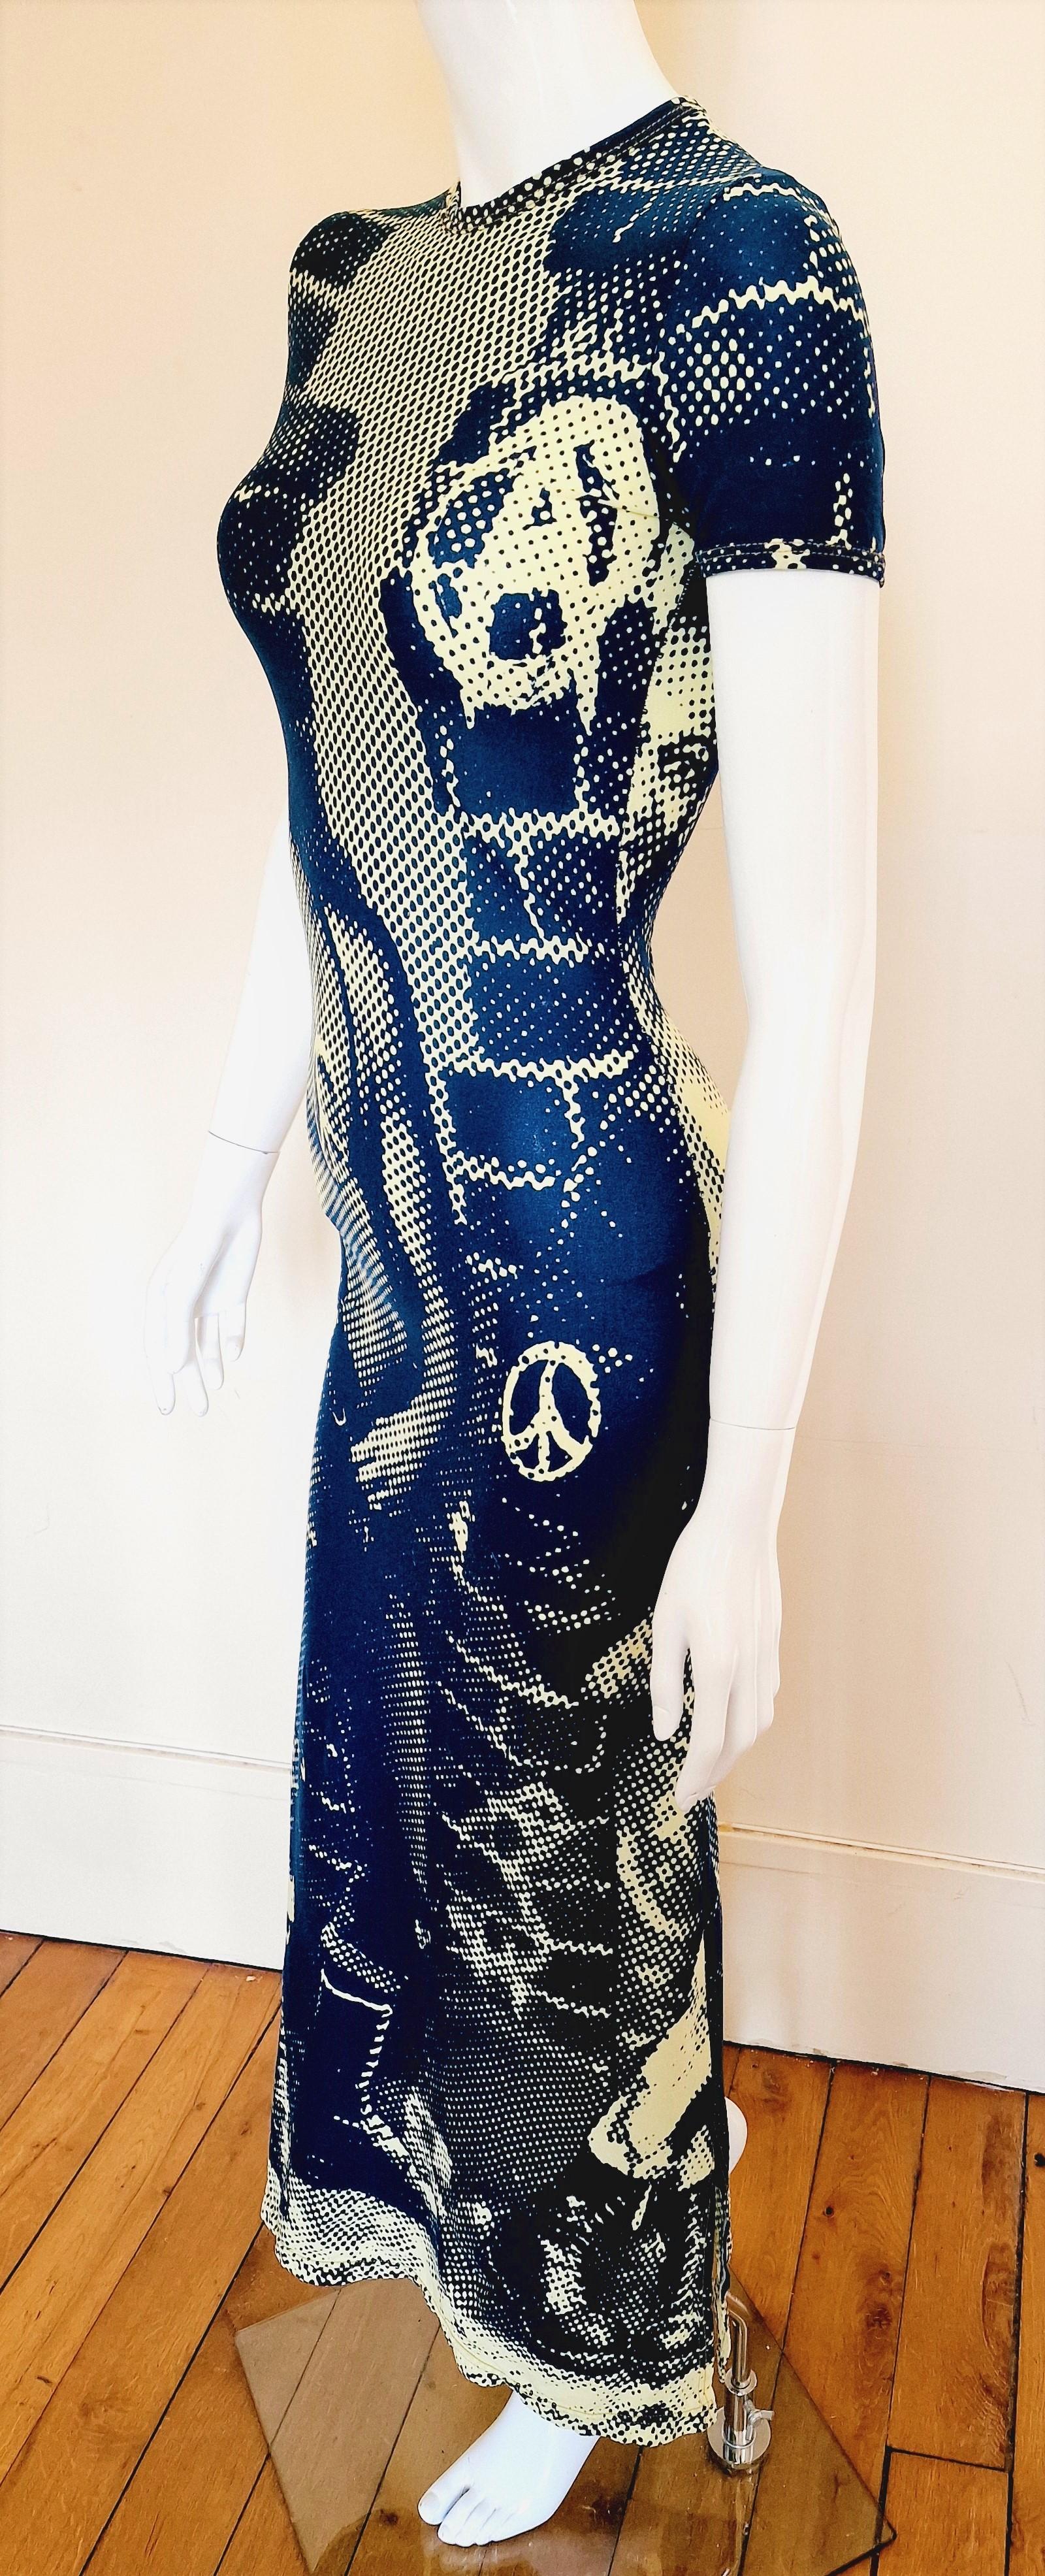 Jean Paul Gaultier Punk Fight Against Racism 1997 AW Print Tattoo Top Maxi Dress For Sale 3